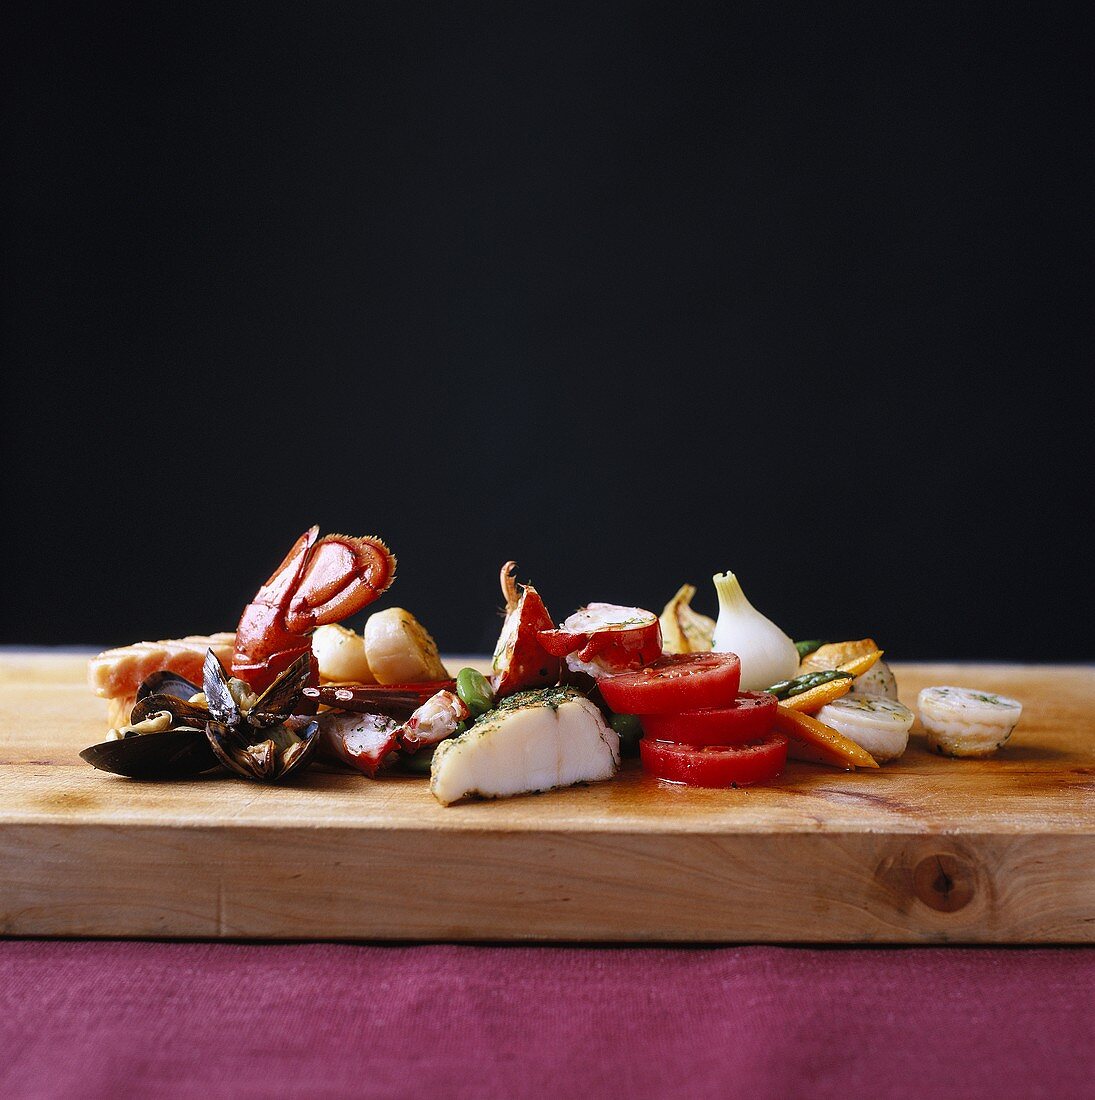 Seafood and vegetables on wooden board